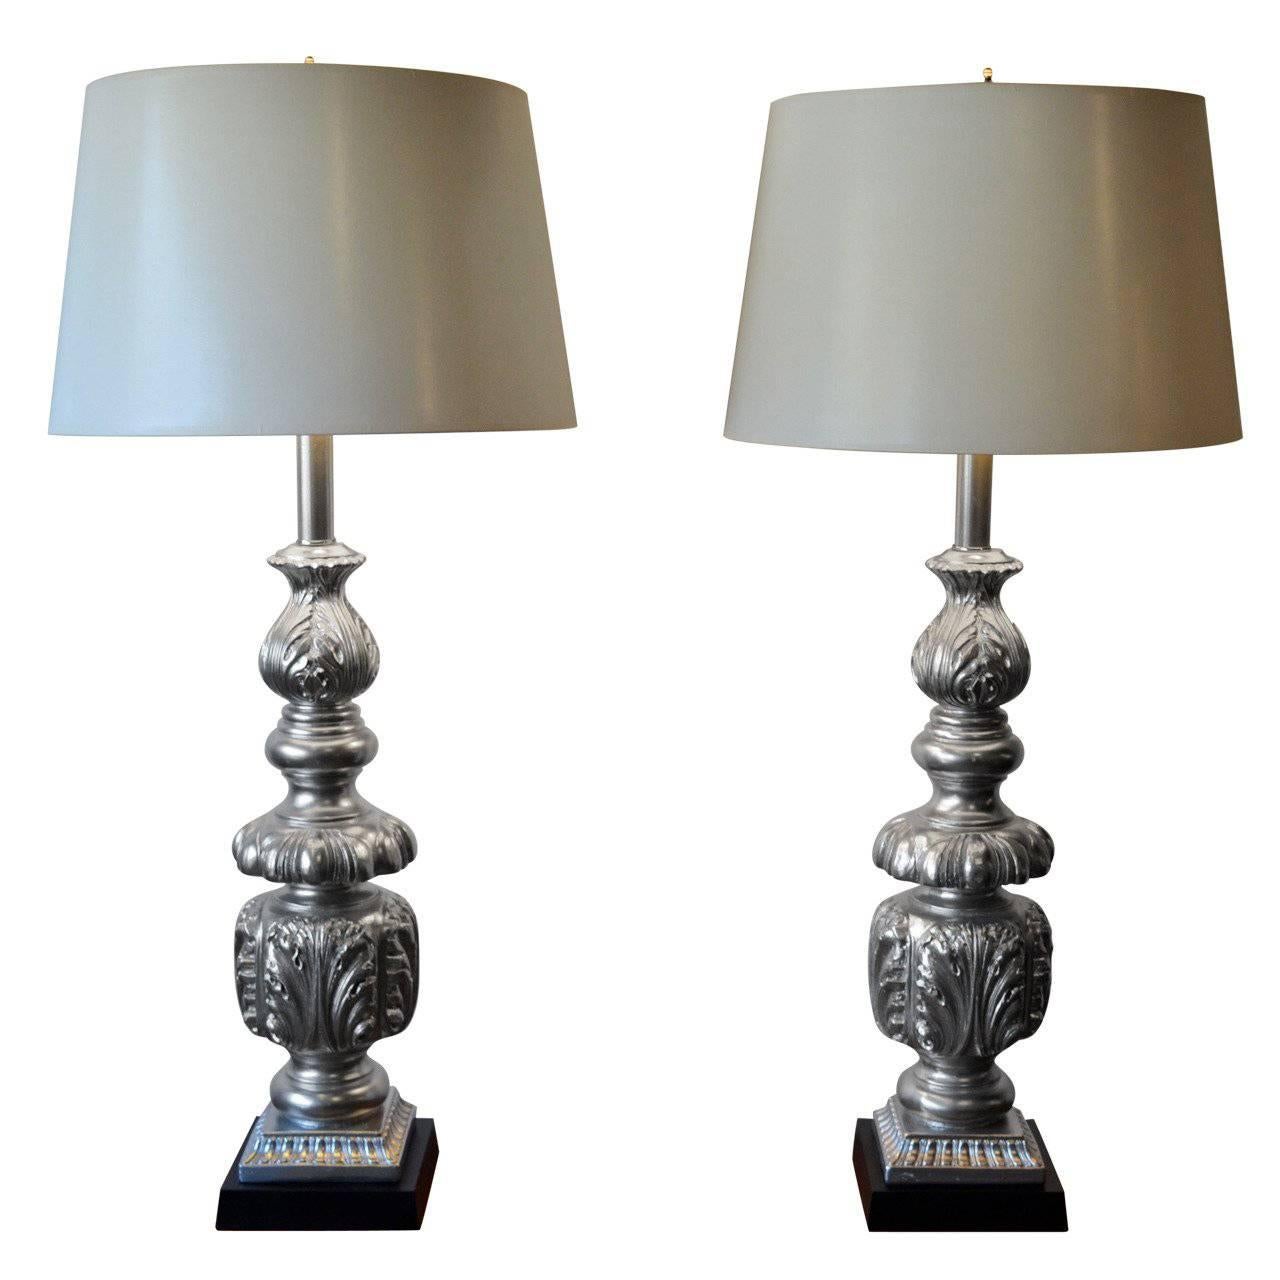 Pair of Large Hollywood Regency Silver Painted Ornate Table Lamps, Italy